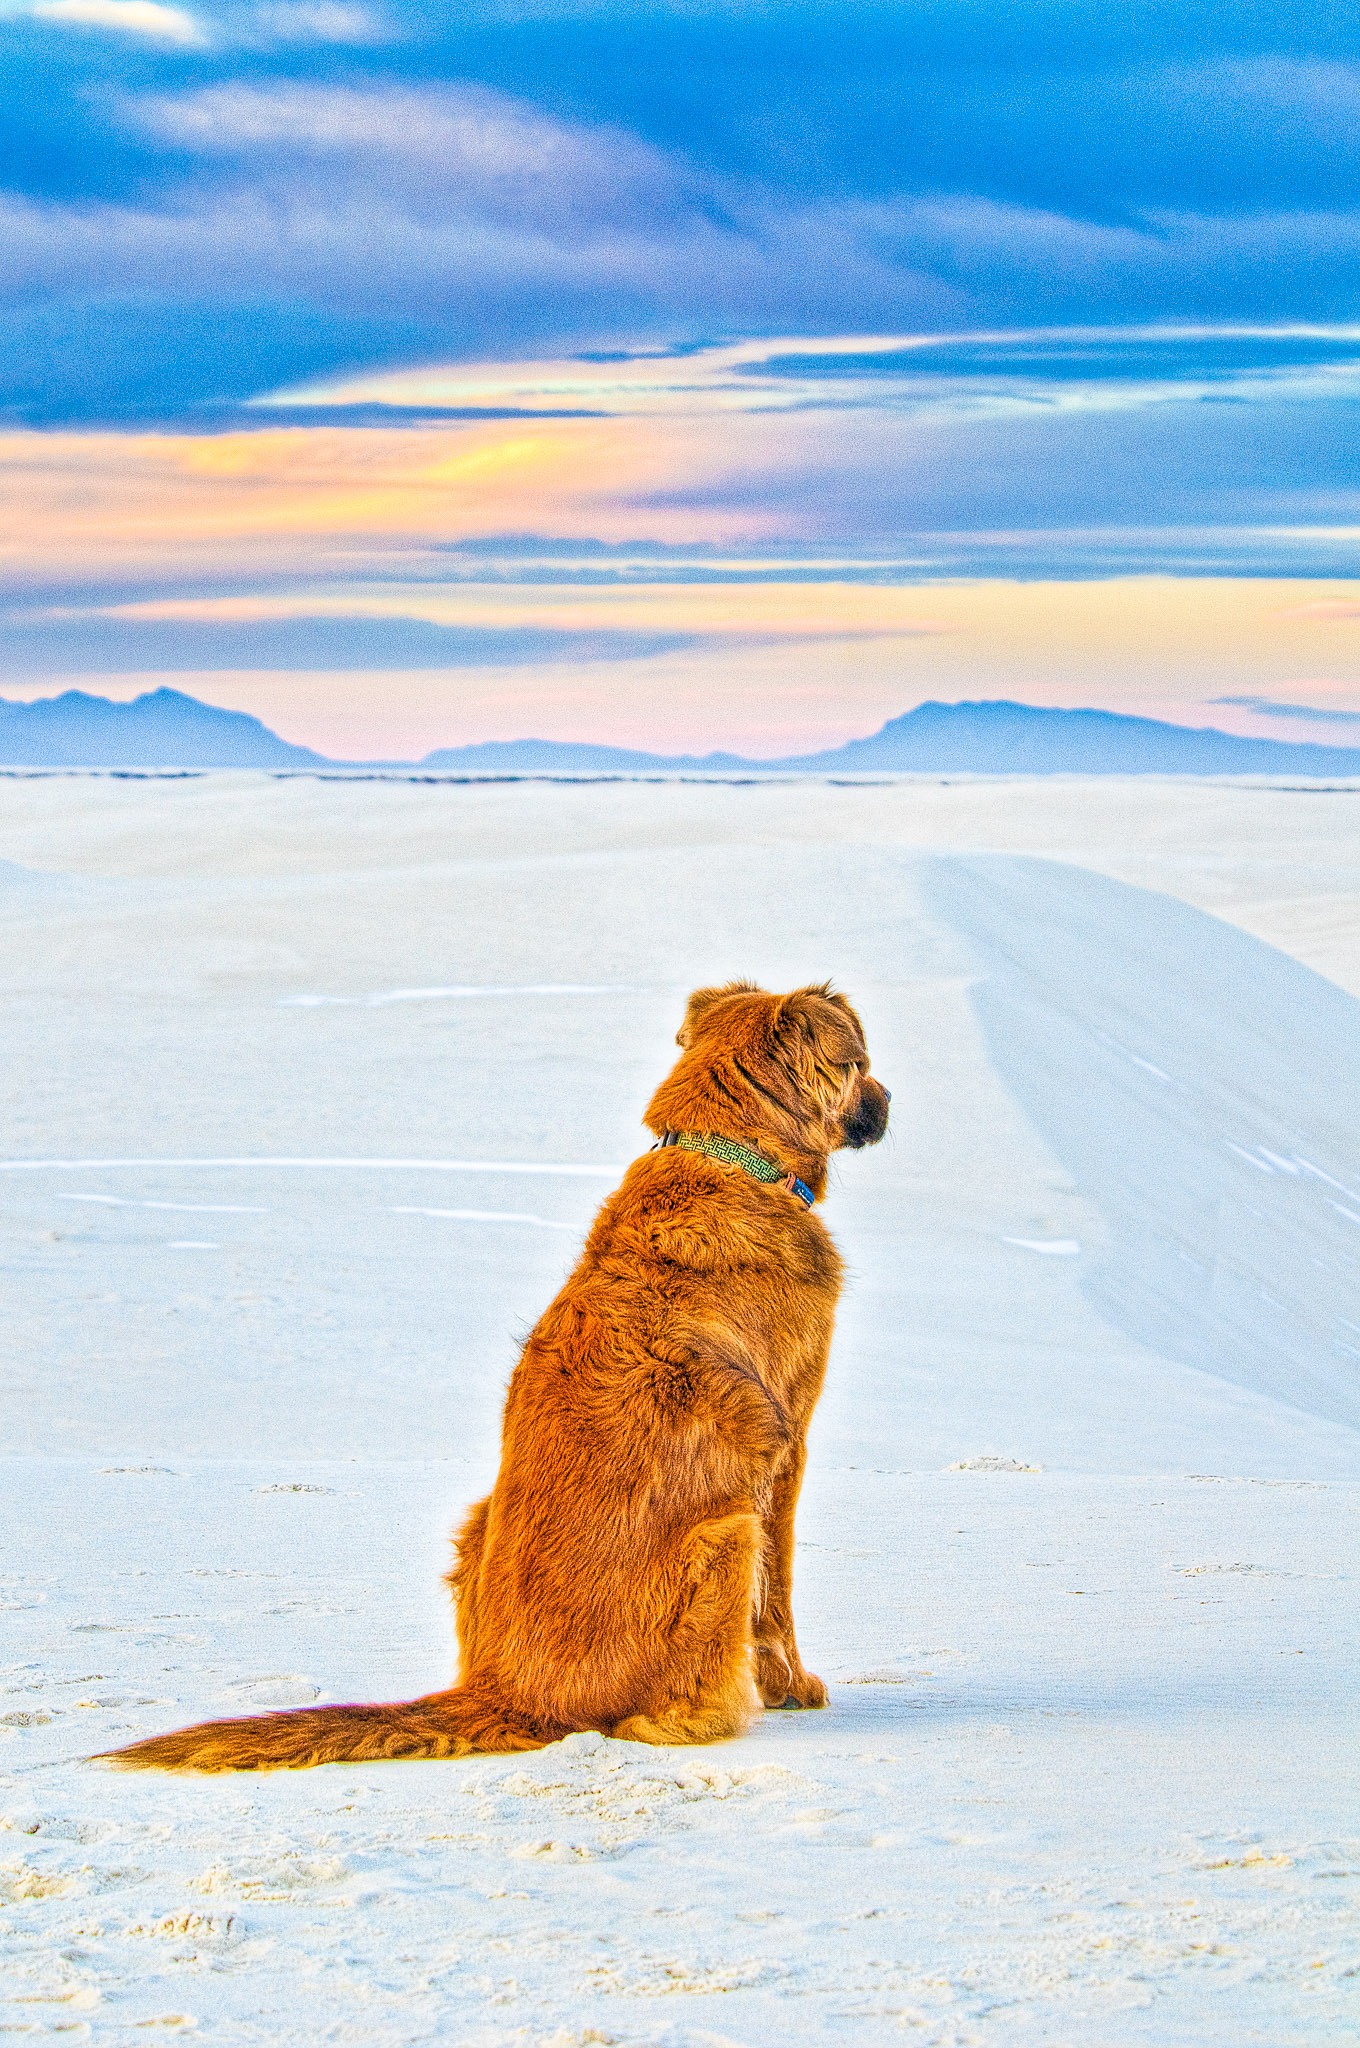 Batu listens intently to coyotes howling at sunset in White Sands National Monument. The coyotes were about two kilometers away.